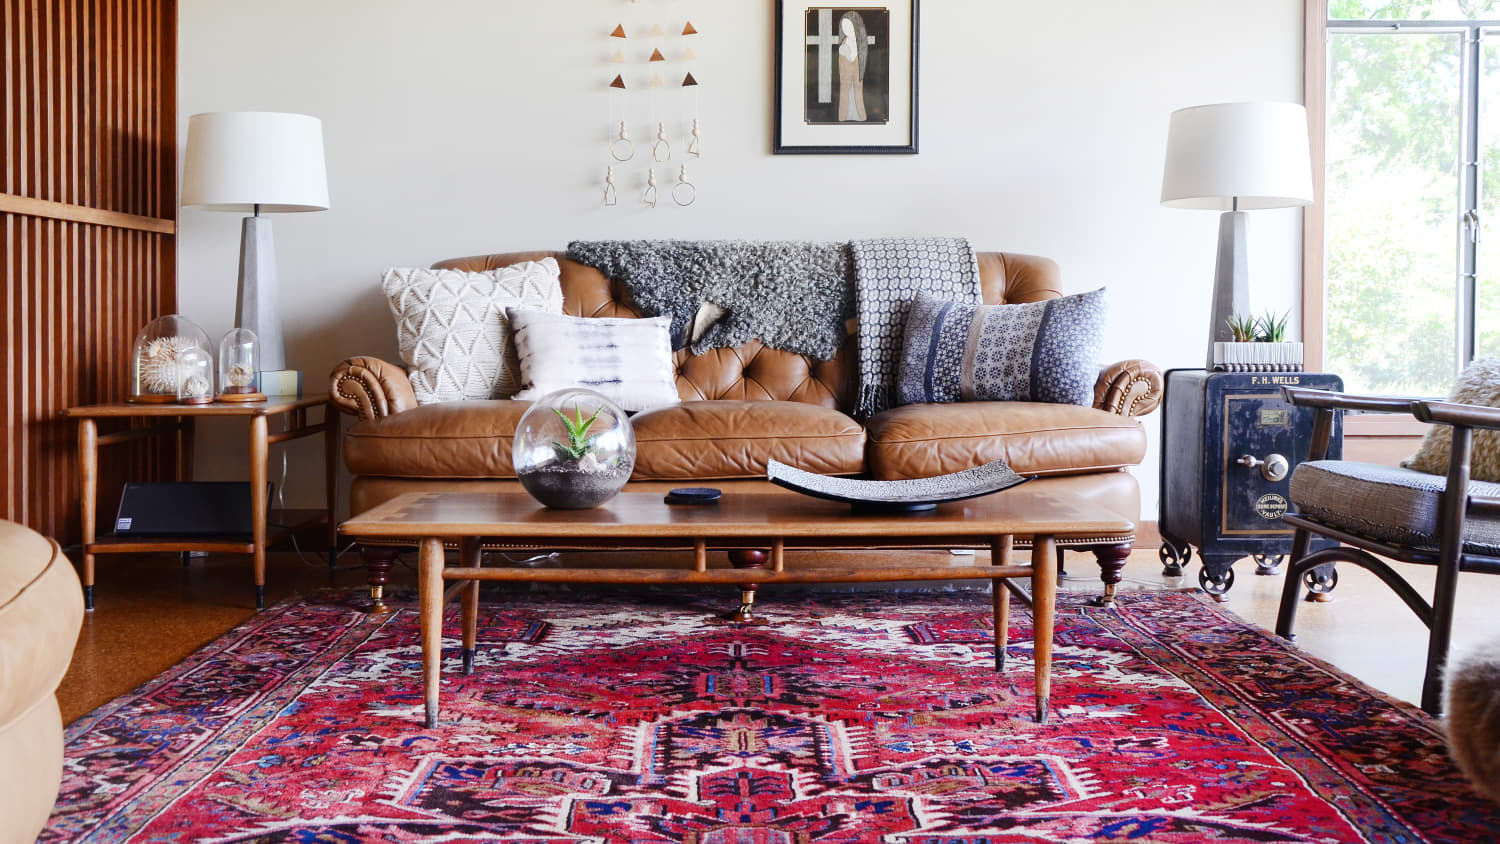 How to Layer Rugs on Carpet - The Home Depot